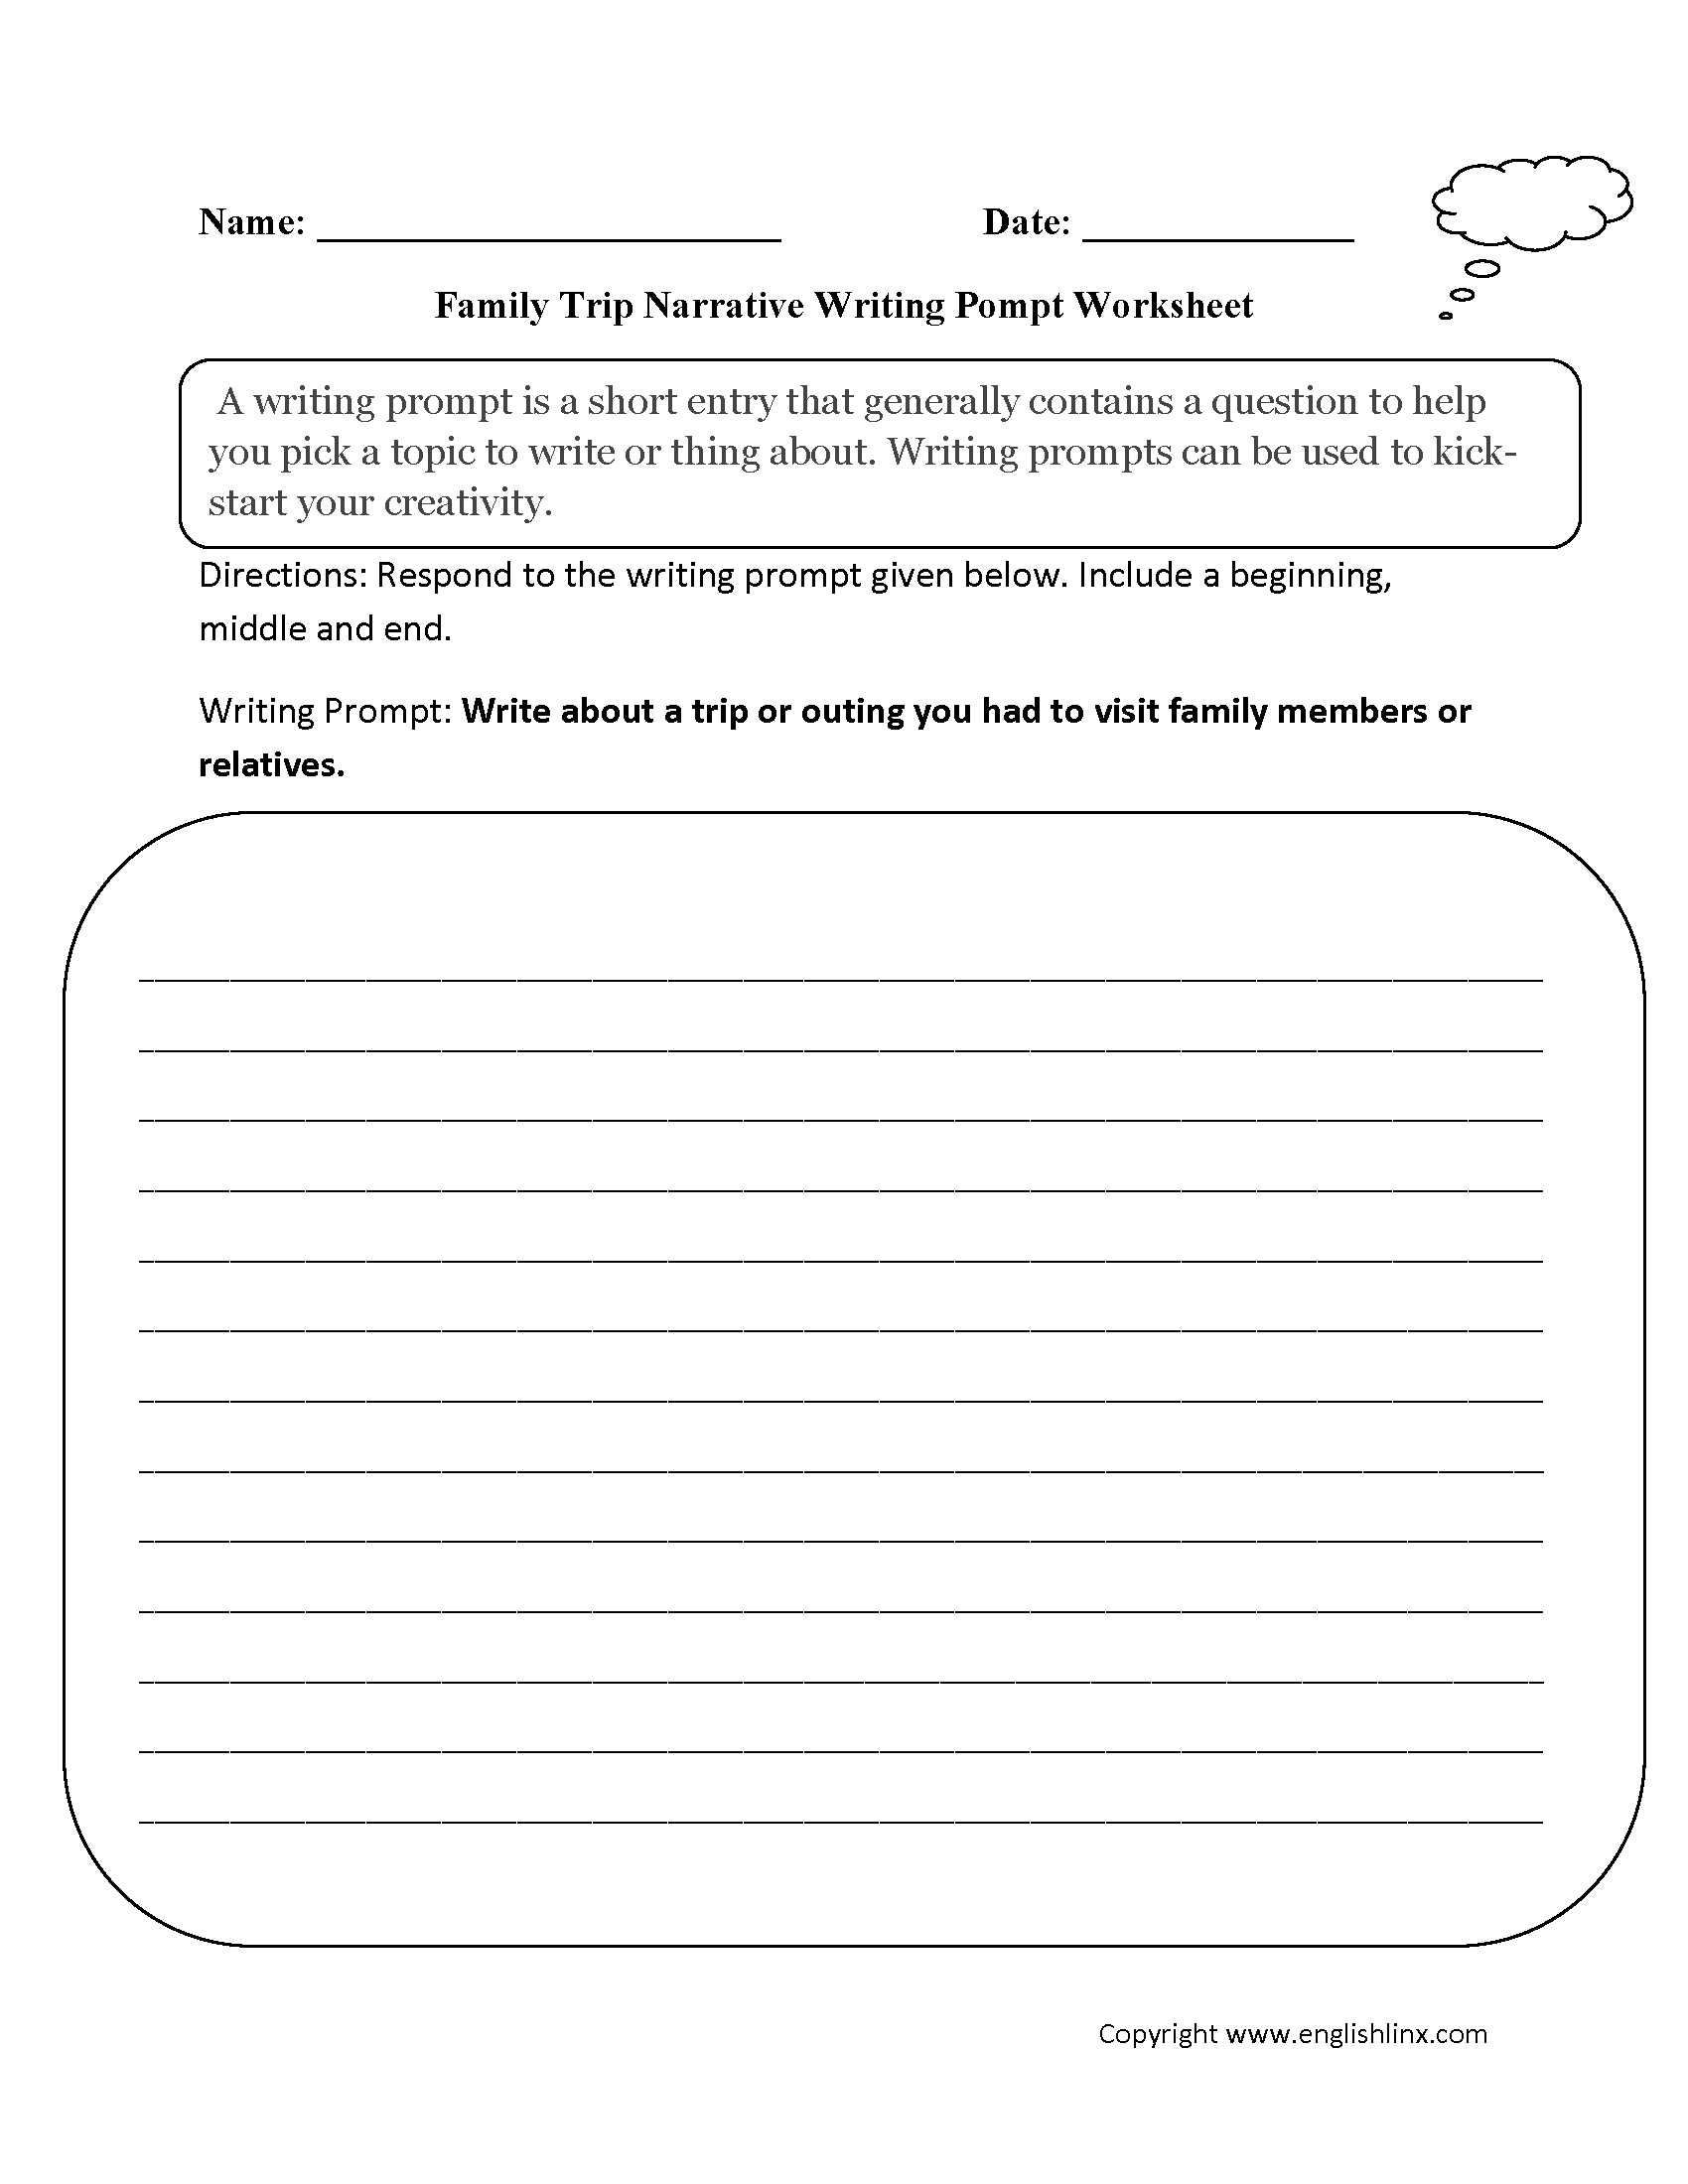 Creative Writing Prompts Worksheets  Writings And Essays Corner